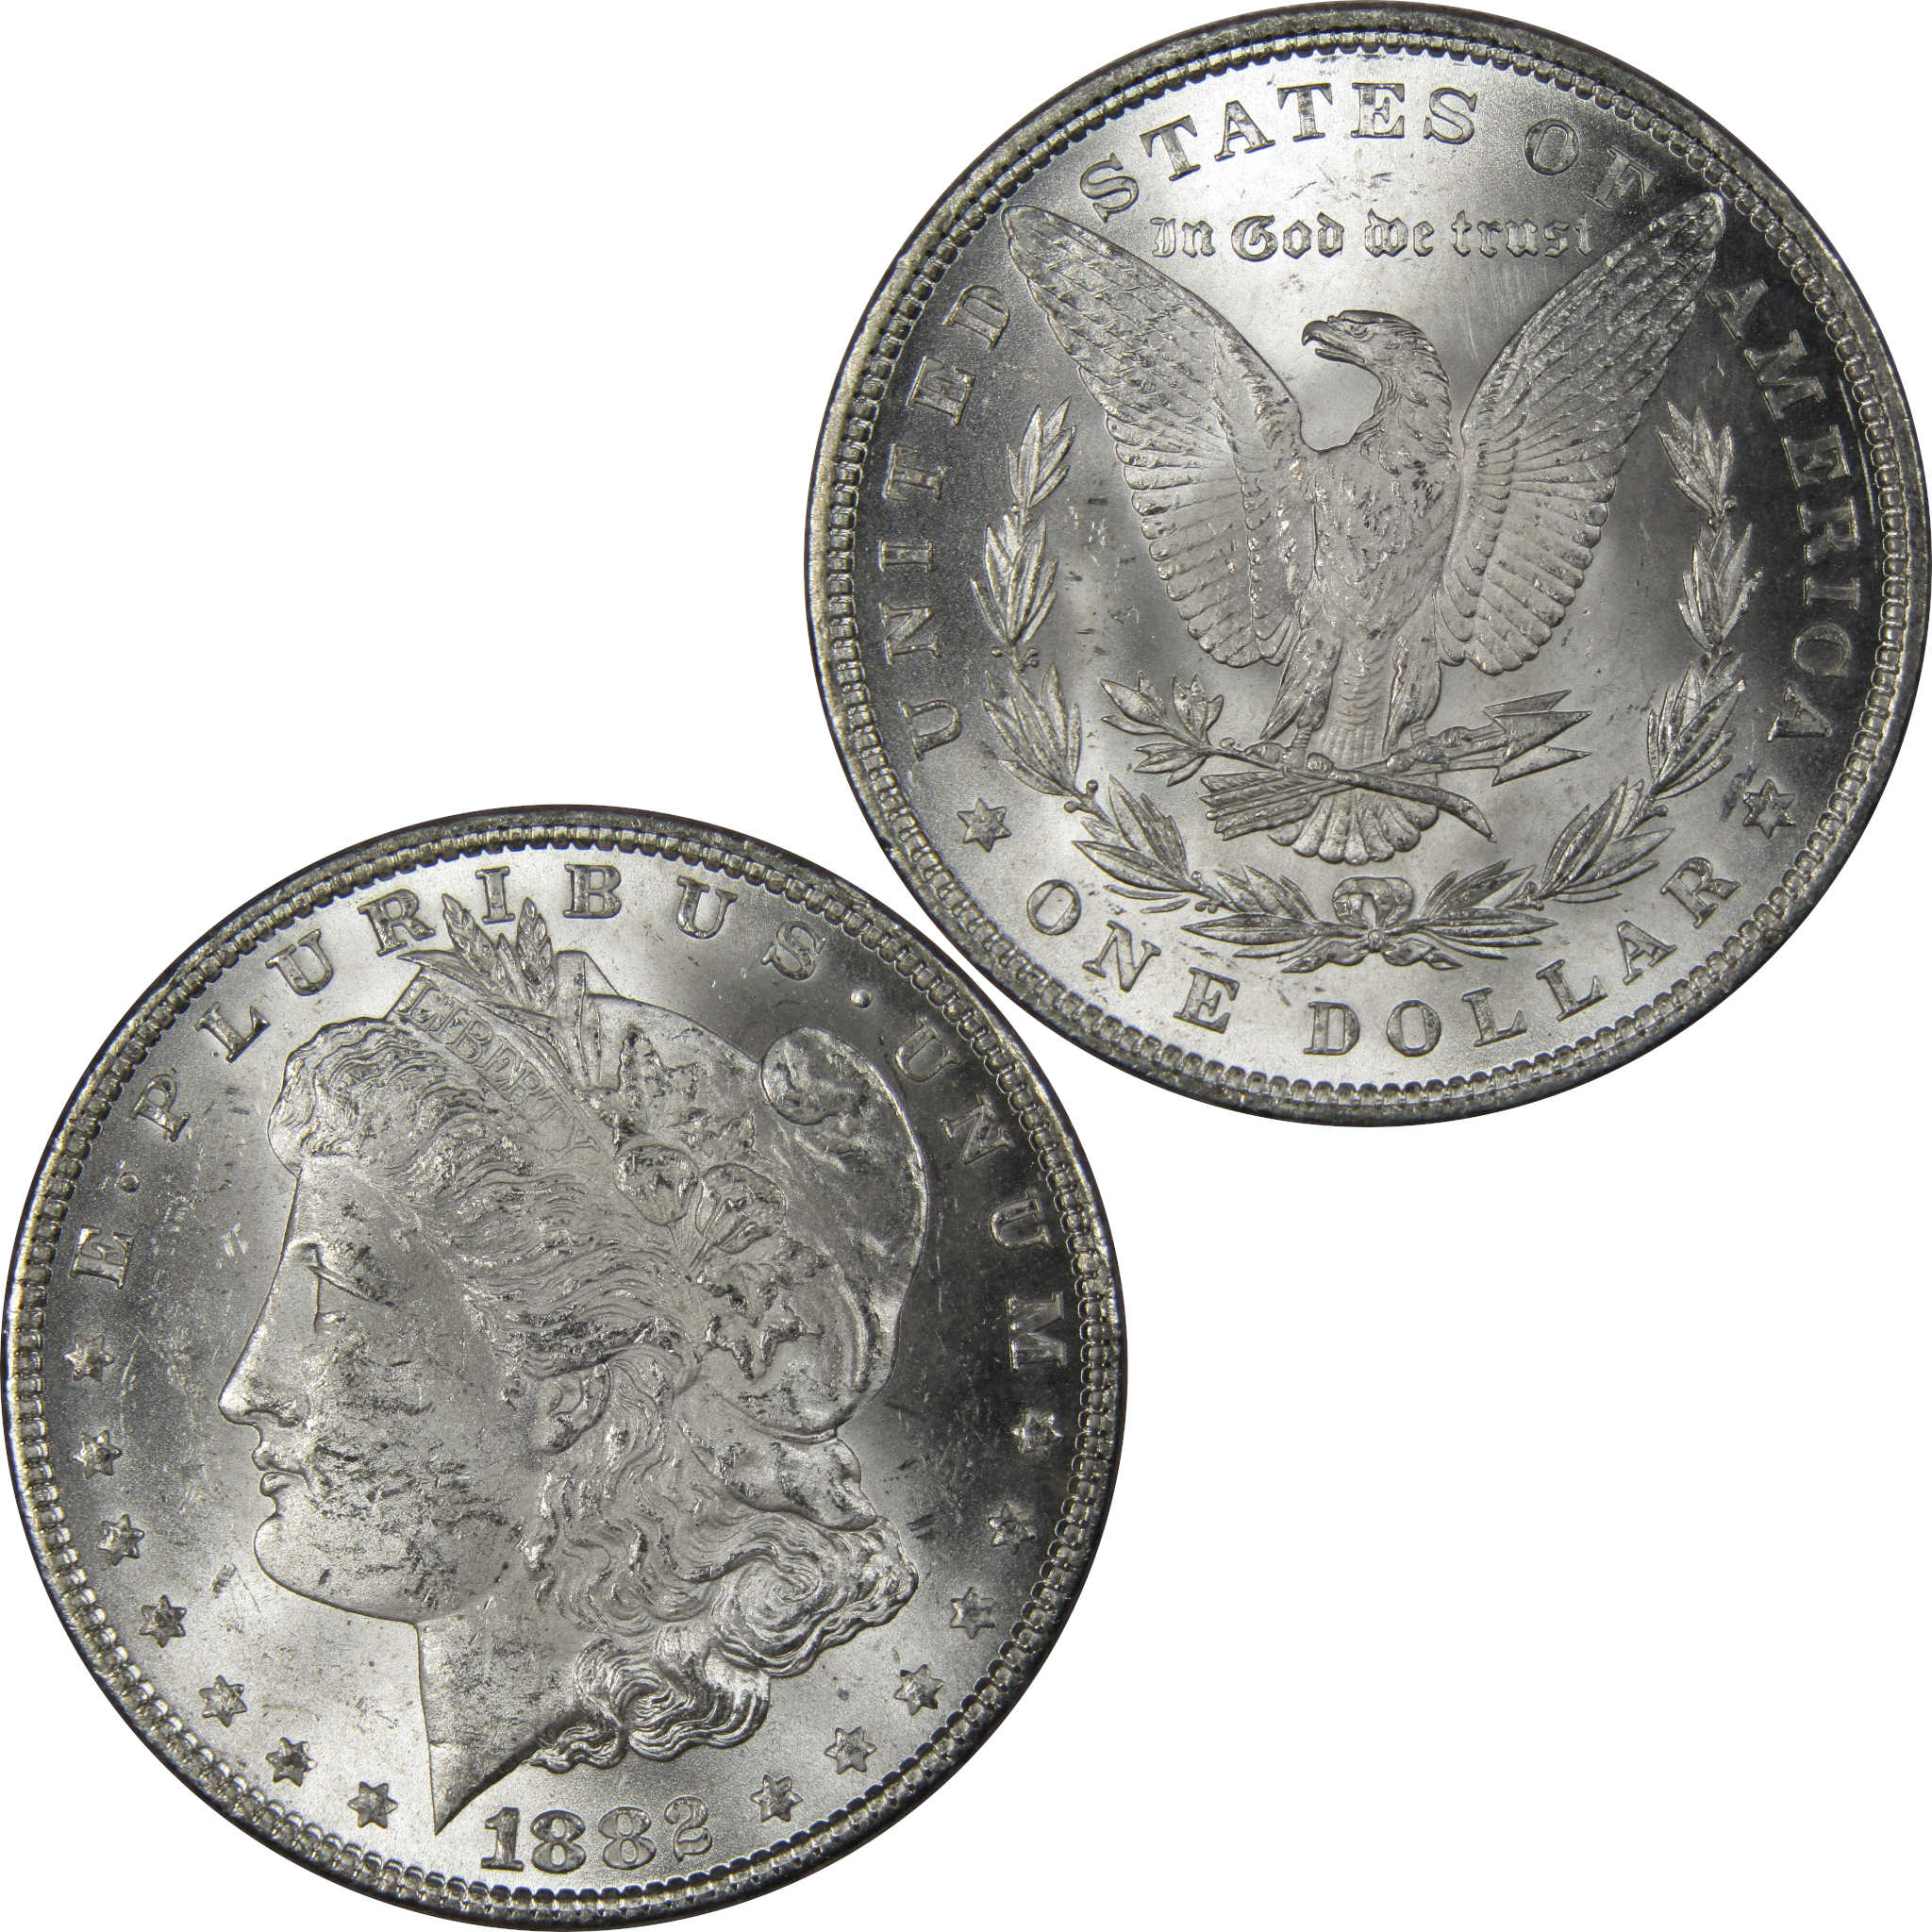 1882 Morgan Dollar BU Uncirculated Mint State 90% Silver SKU:IPC9649 - Morgan coin - Morgan silver dollar - Morgan silver dollar for sale - Profile Coins &amp; Collectibles